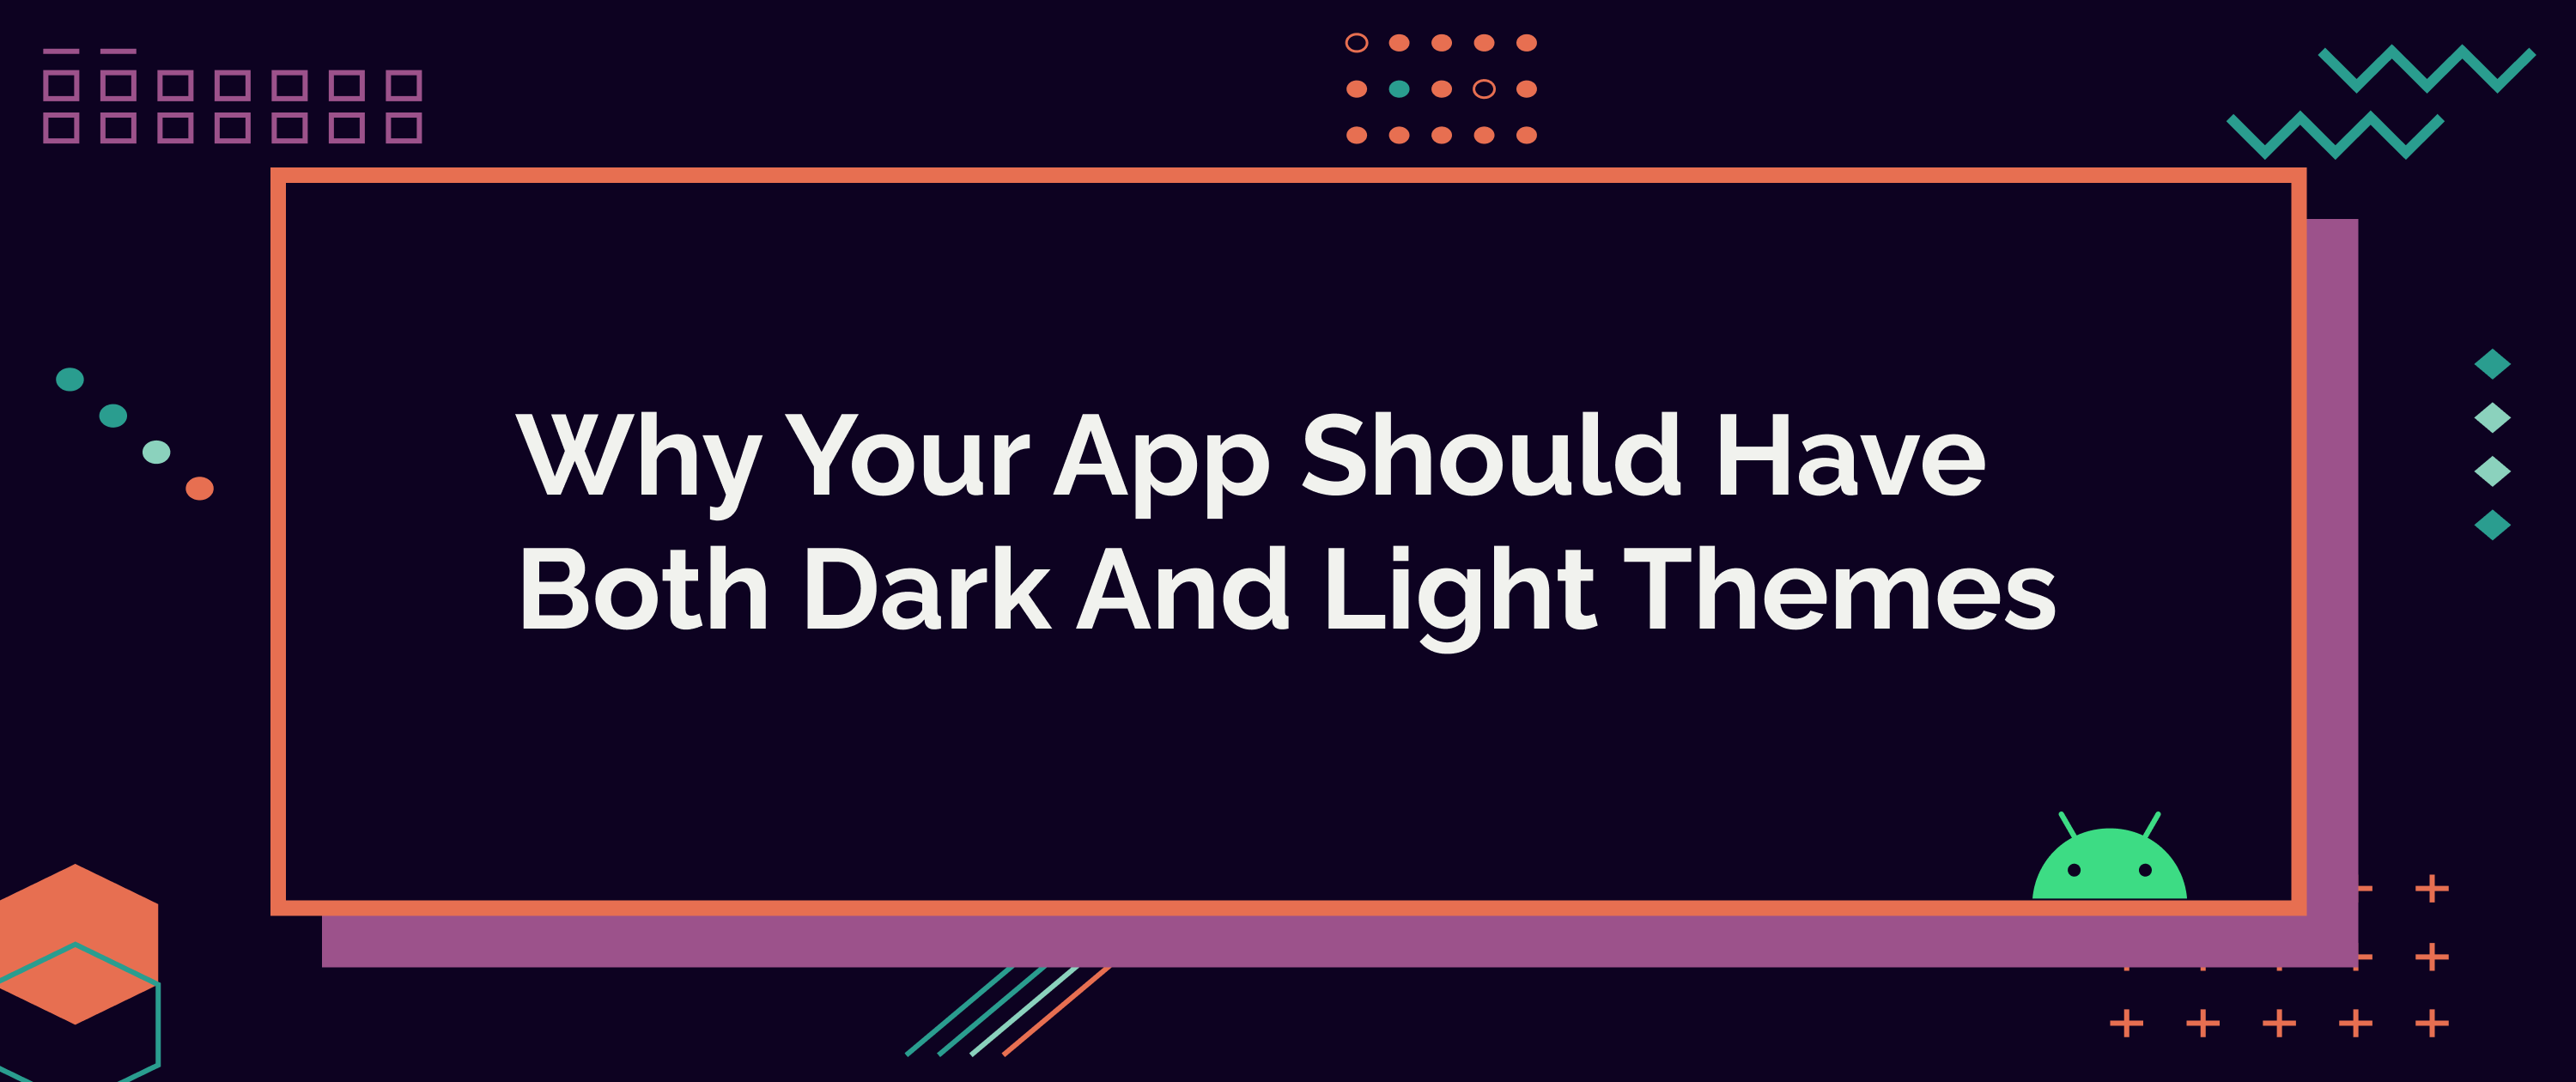 Your App Should Have Both Dark And Light Themes